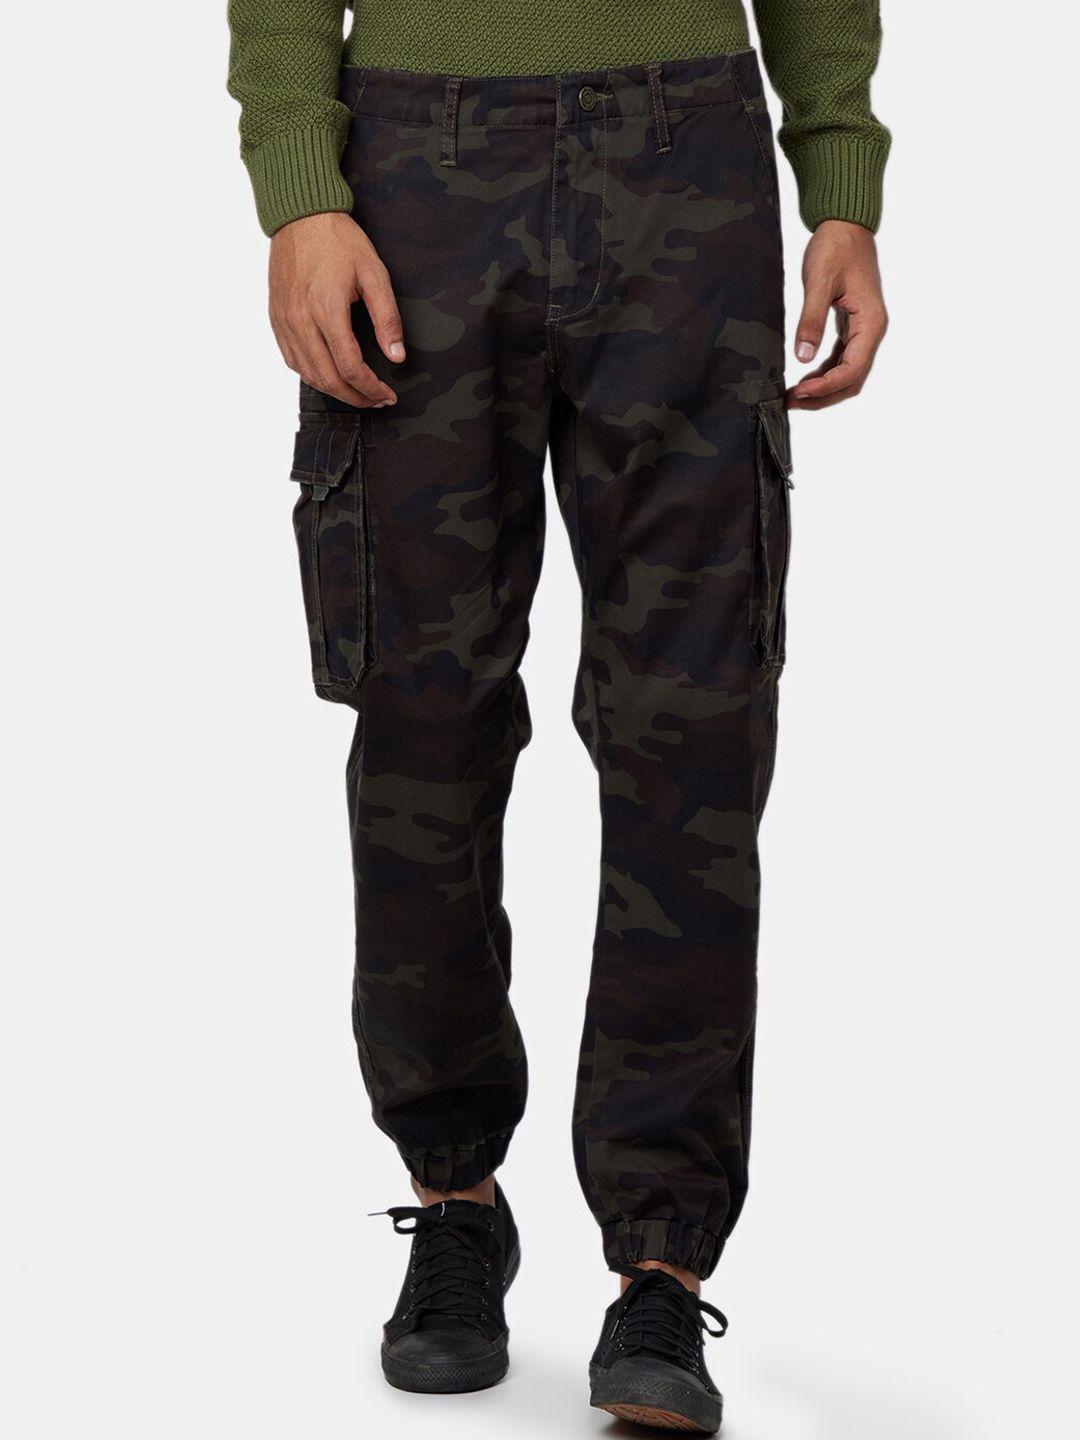 royal-enfield-men-brown-camouflage-printed-cotton-cargos-trousers